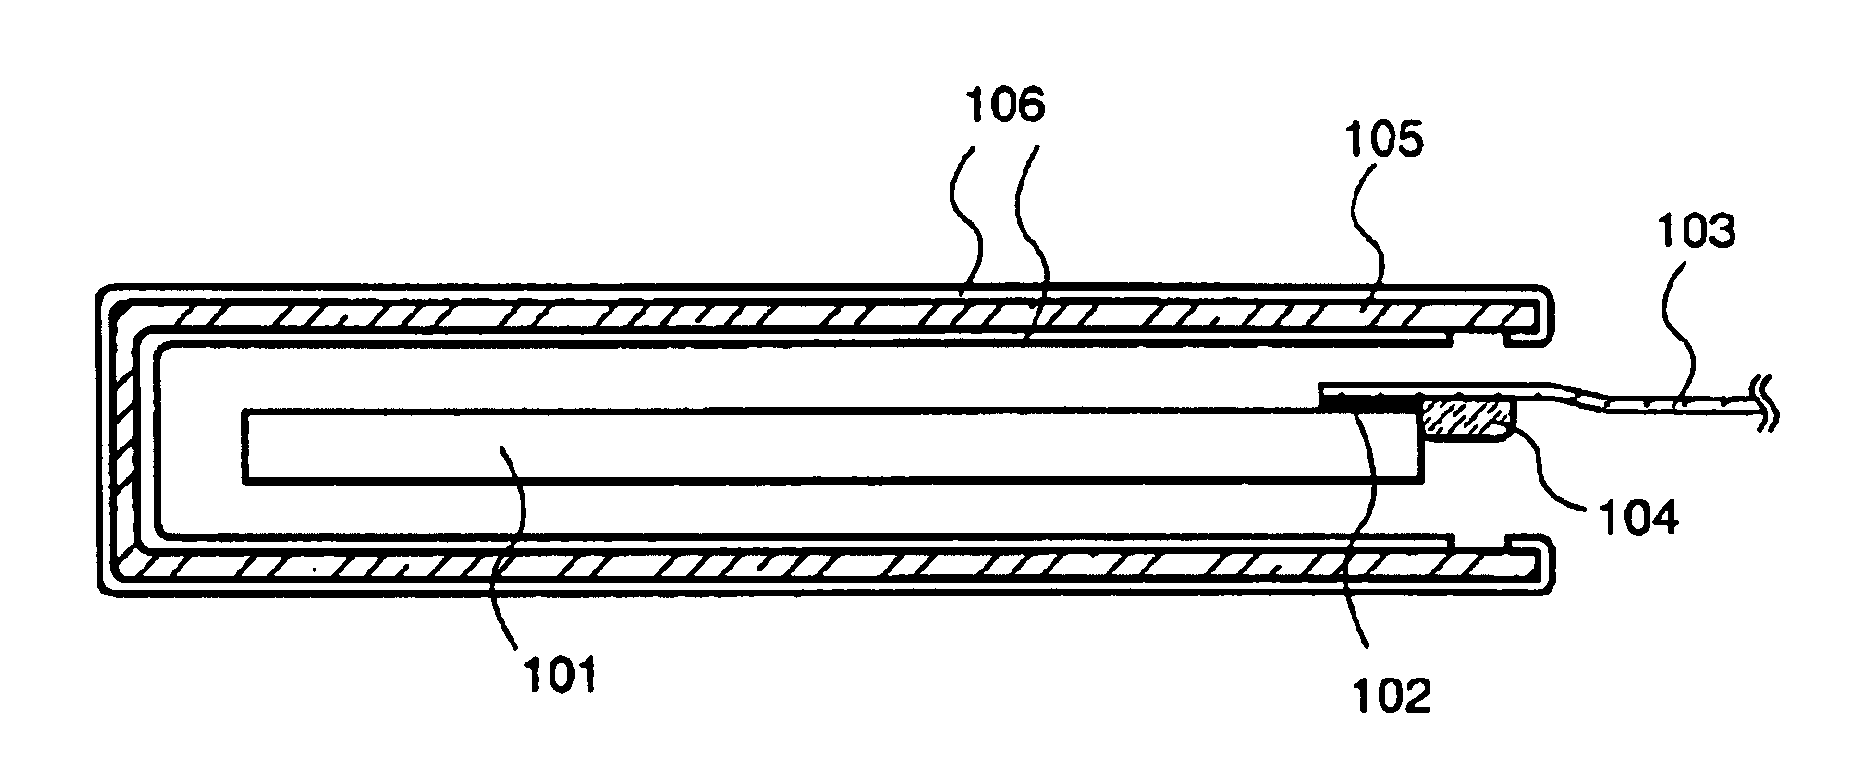 Light emitting device, electronic equipment, and method of manufacturing thereof